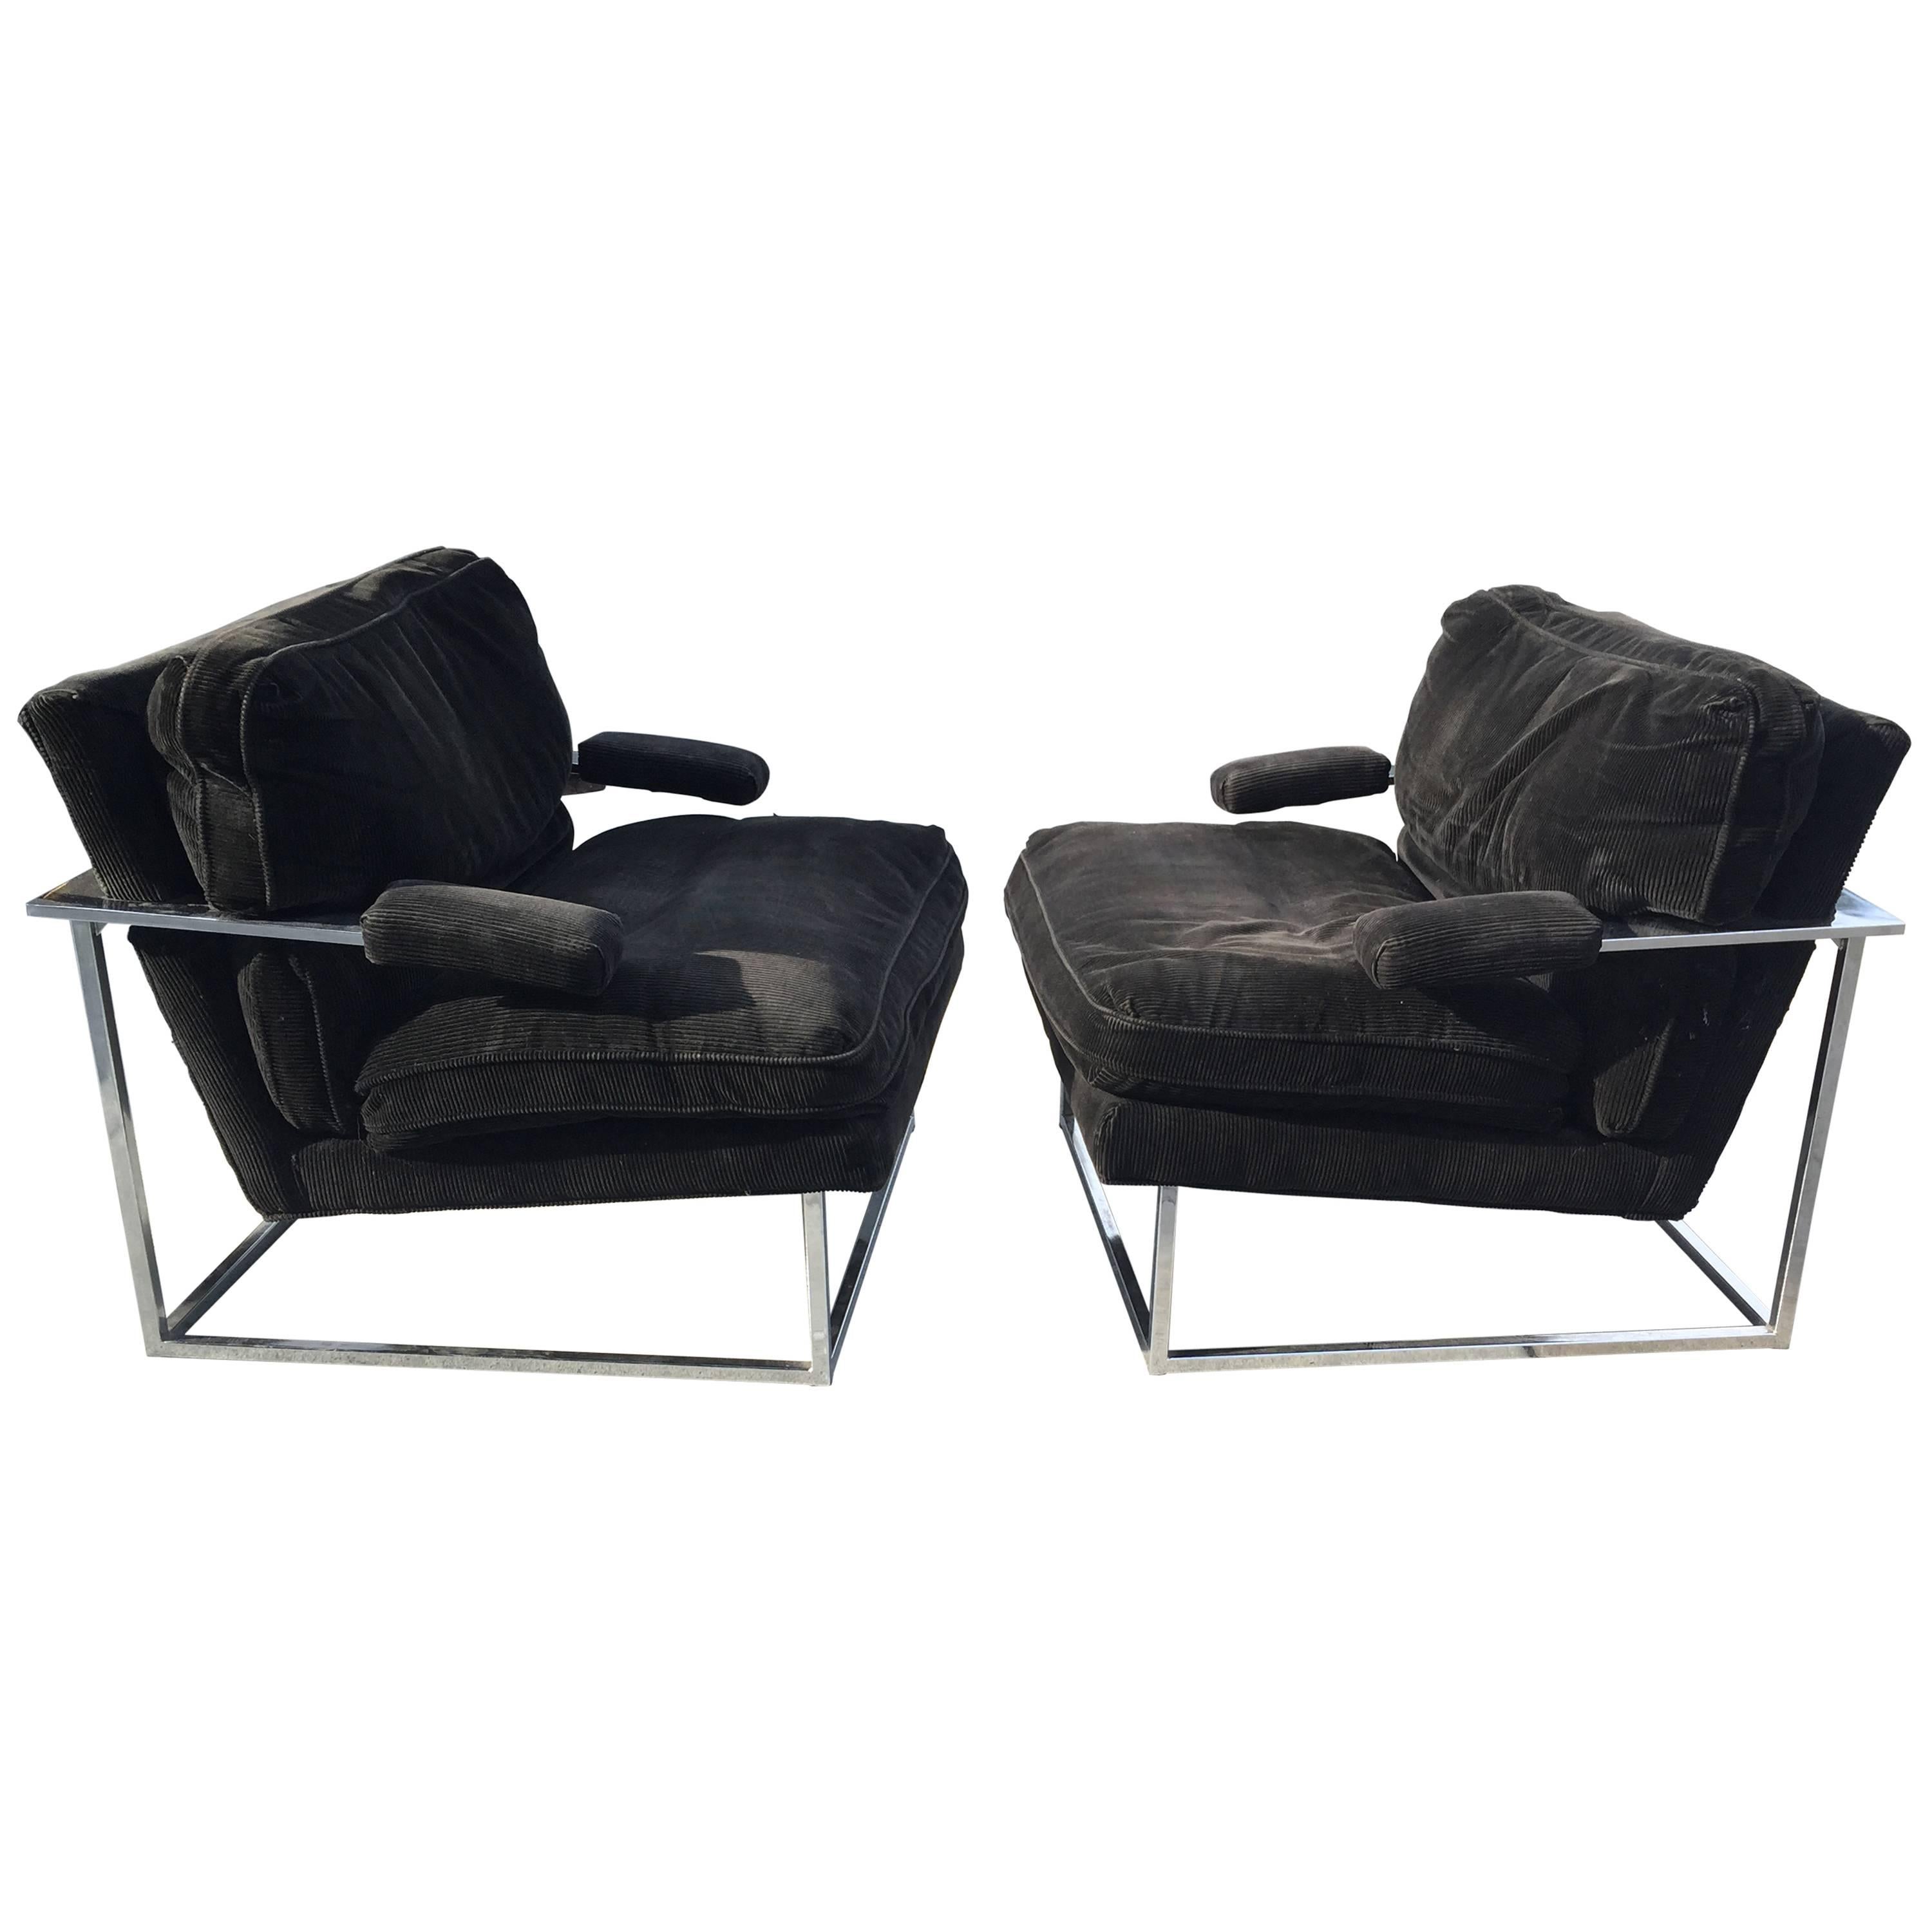 Pair of Chrome Lounge Chairs in the Manner of Milo Baughman